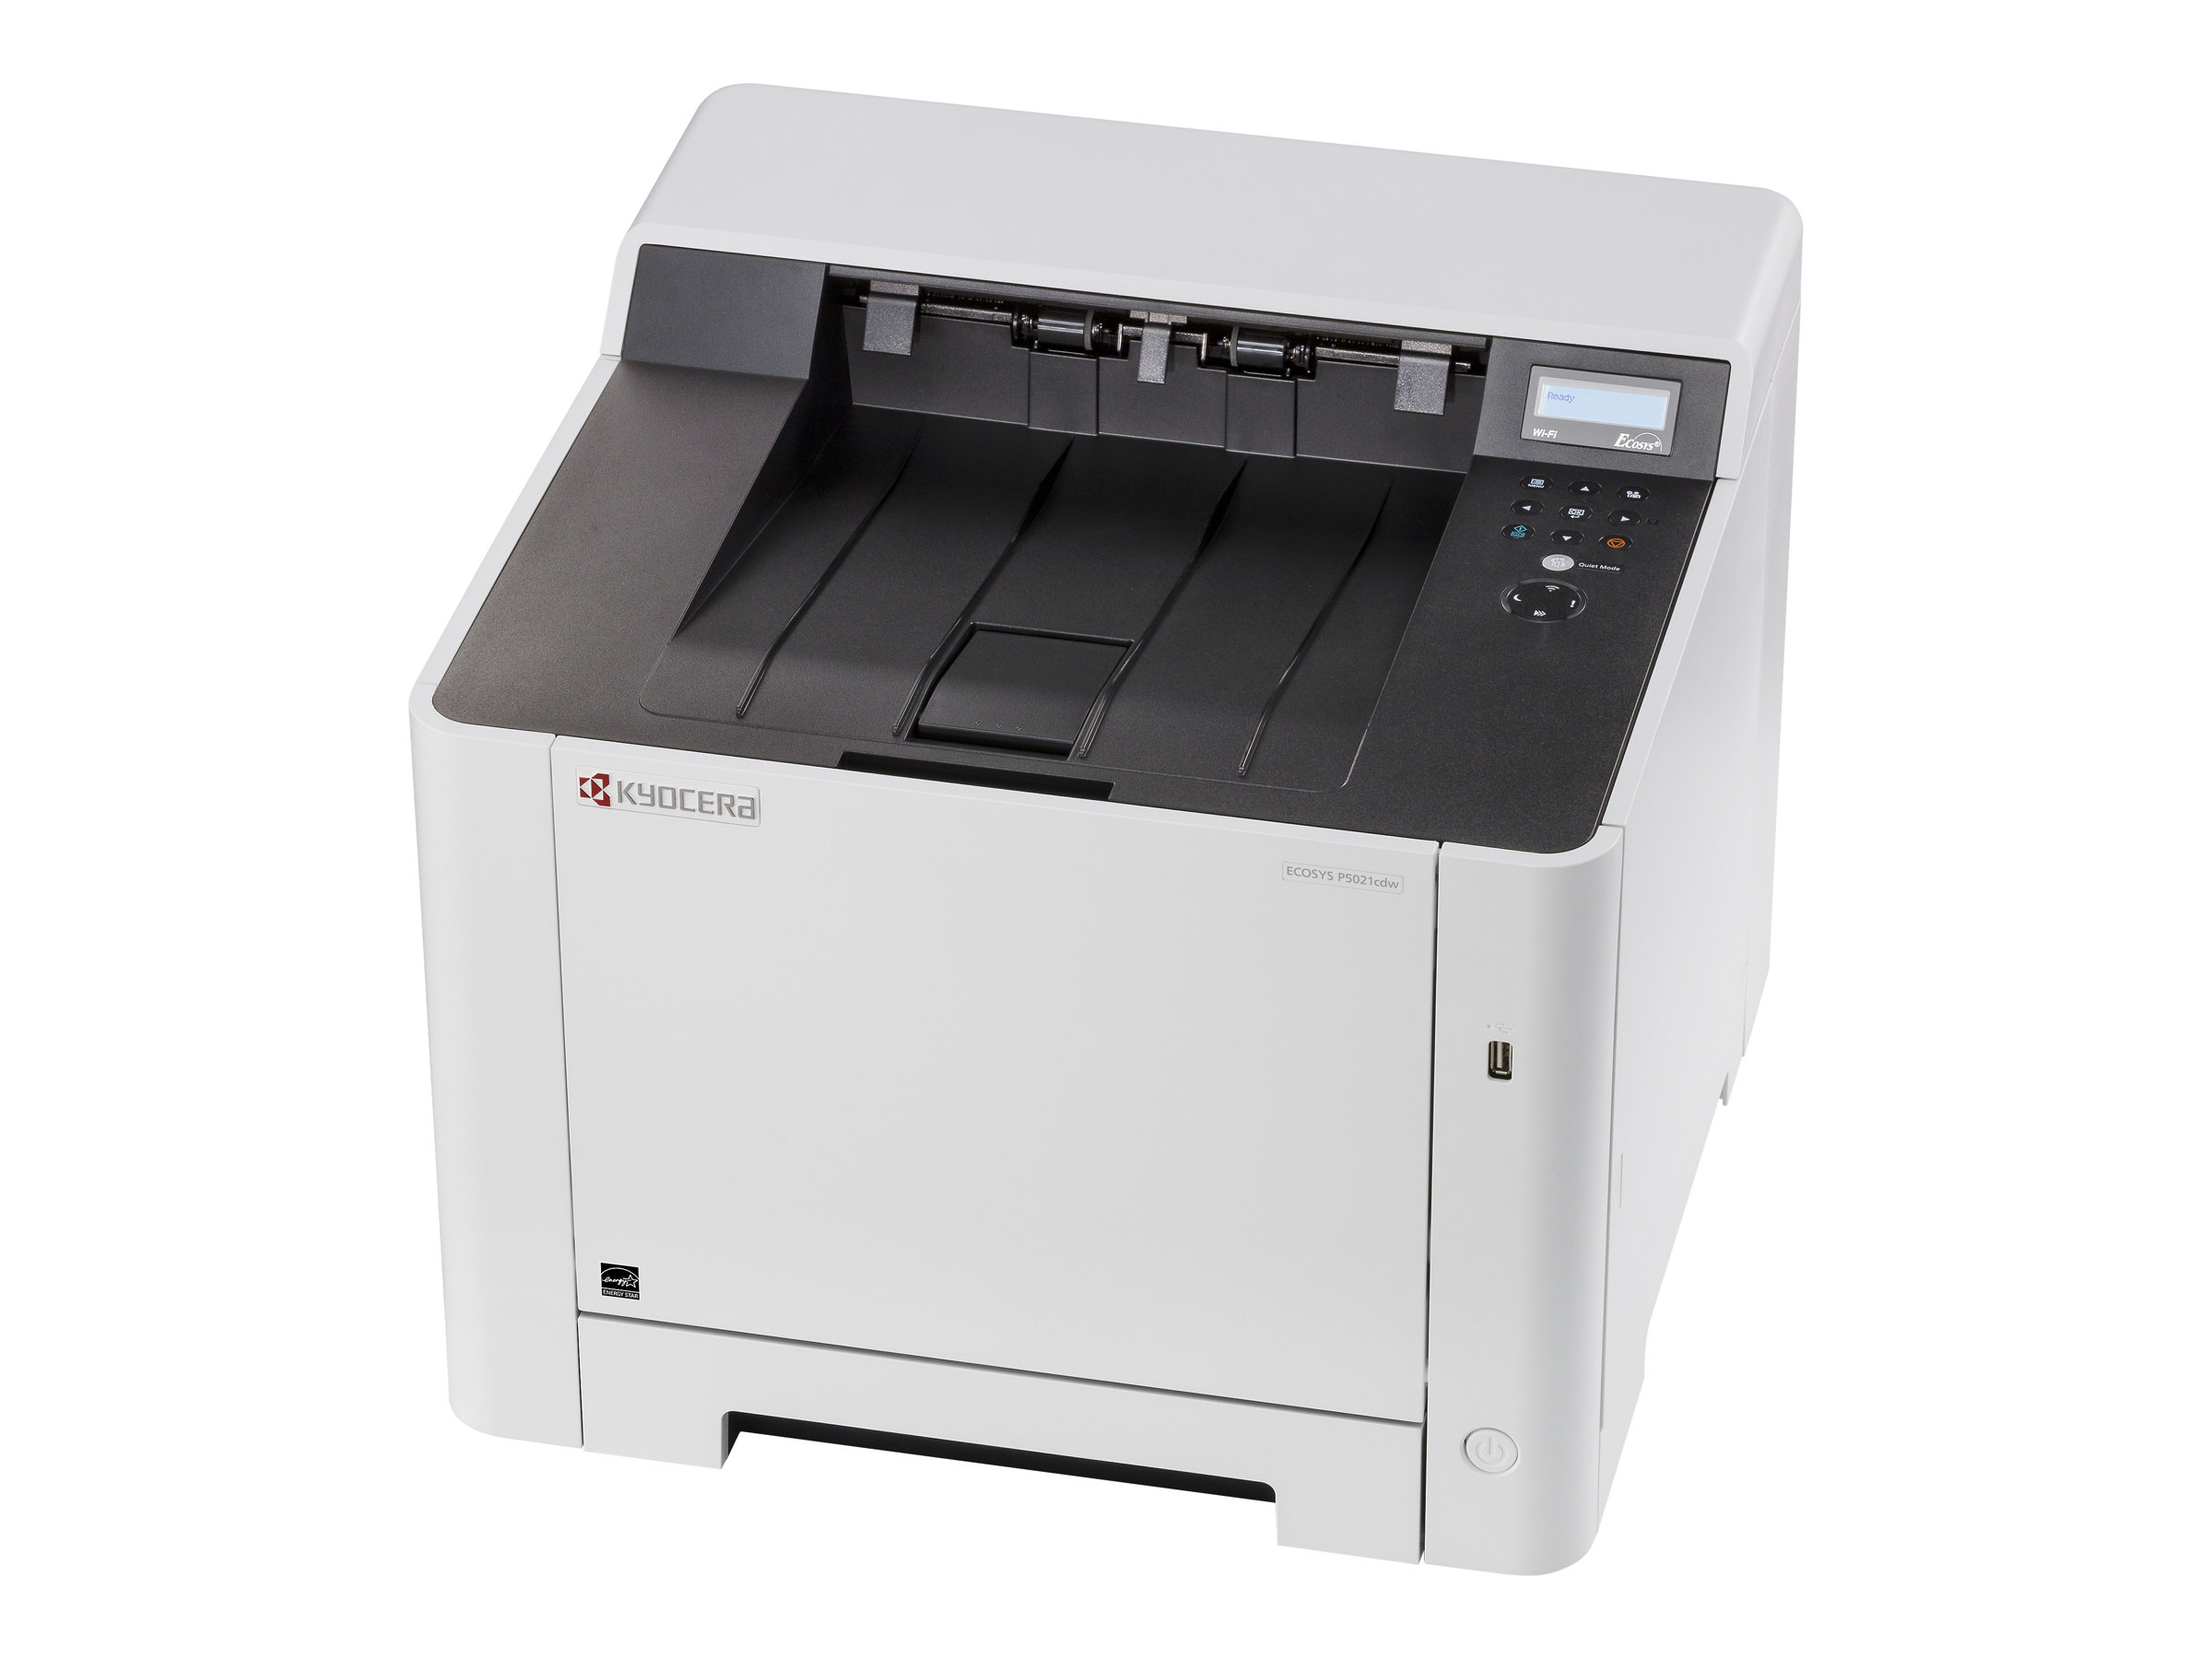 Kyocera ECOSYS P5021cdw - Printer - color - Duplex - laser - A4/Legal - 9600 x 600 dpi - up to 21 ppm (mono) / up to 21 ppm (color) - capacity: 300 sheets - USB 2.0, Gigabit LAN, USB host, Wi-Fi - image 2 of 4